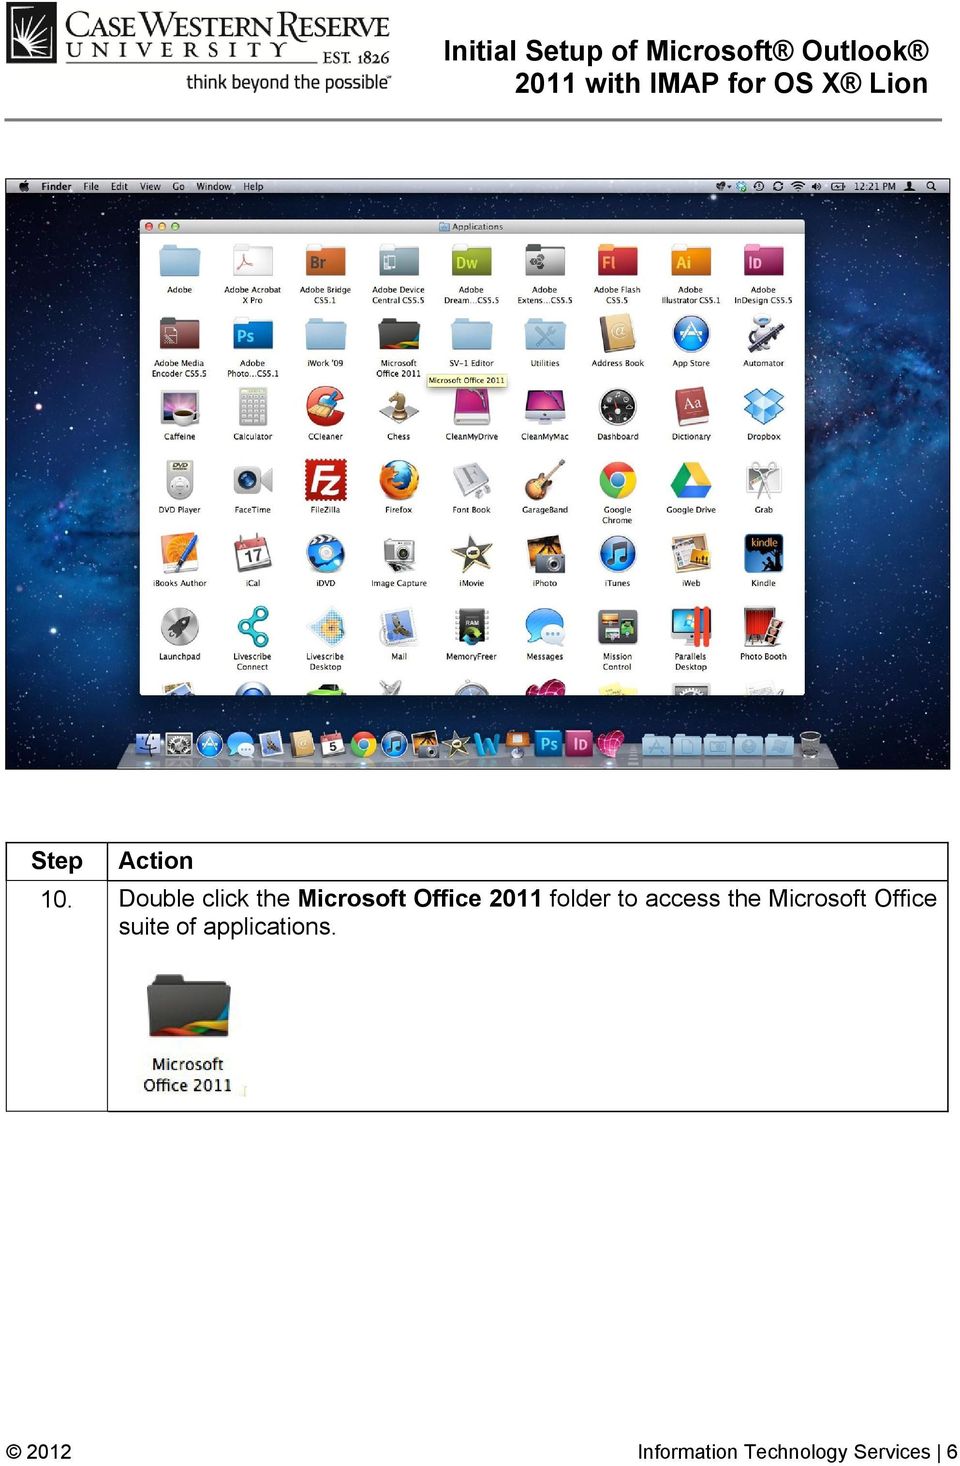 Microsoft Office suite of